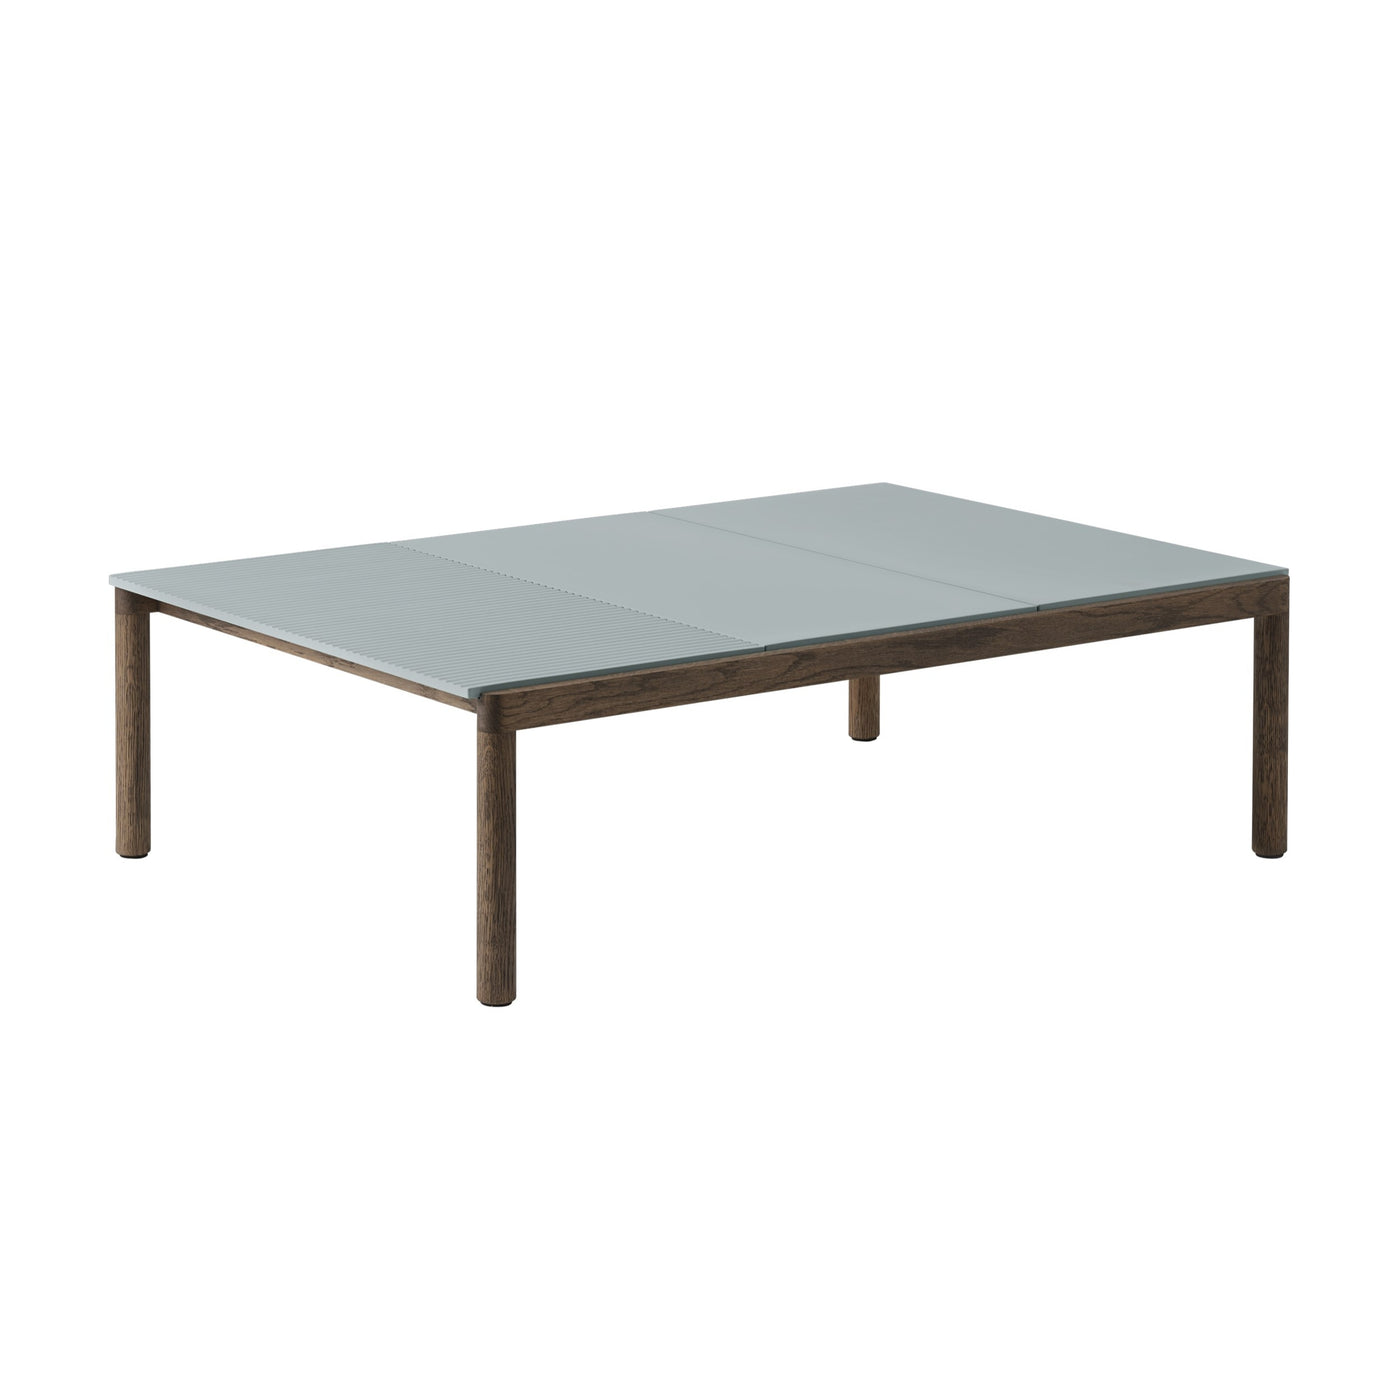 Muuto Couple Coffee Table 2 Plain 1 Wavy Tiles, pale blue with dark stained oak base. #style_2-plain-1-wavy